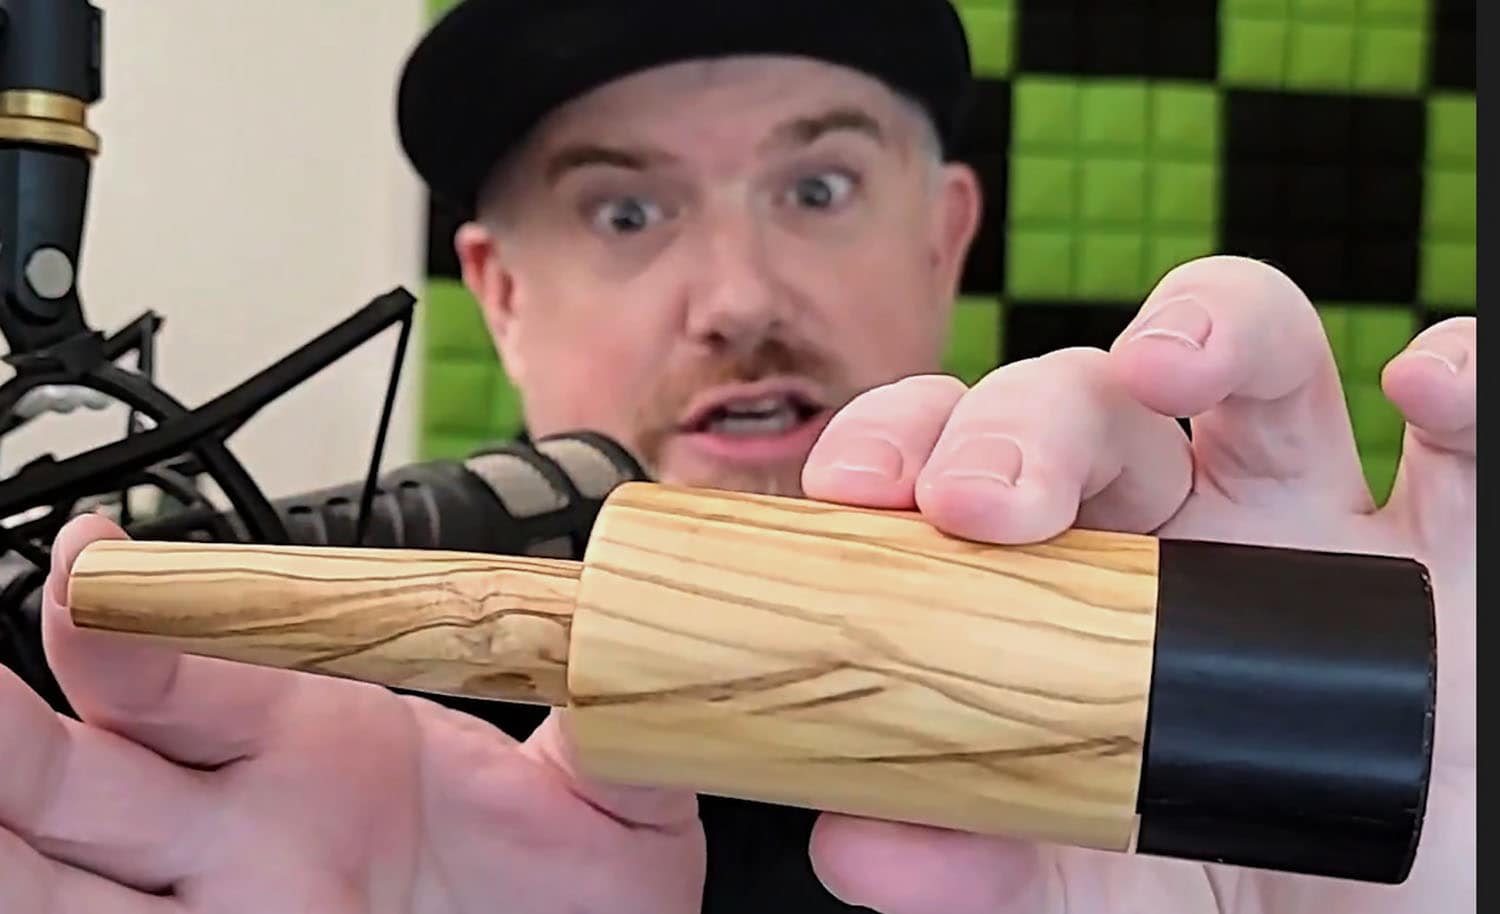 Troy from 420vapezone holding the CouchLog with stem attached